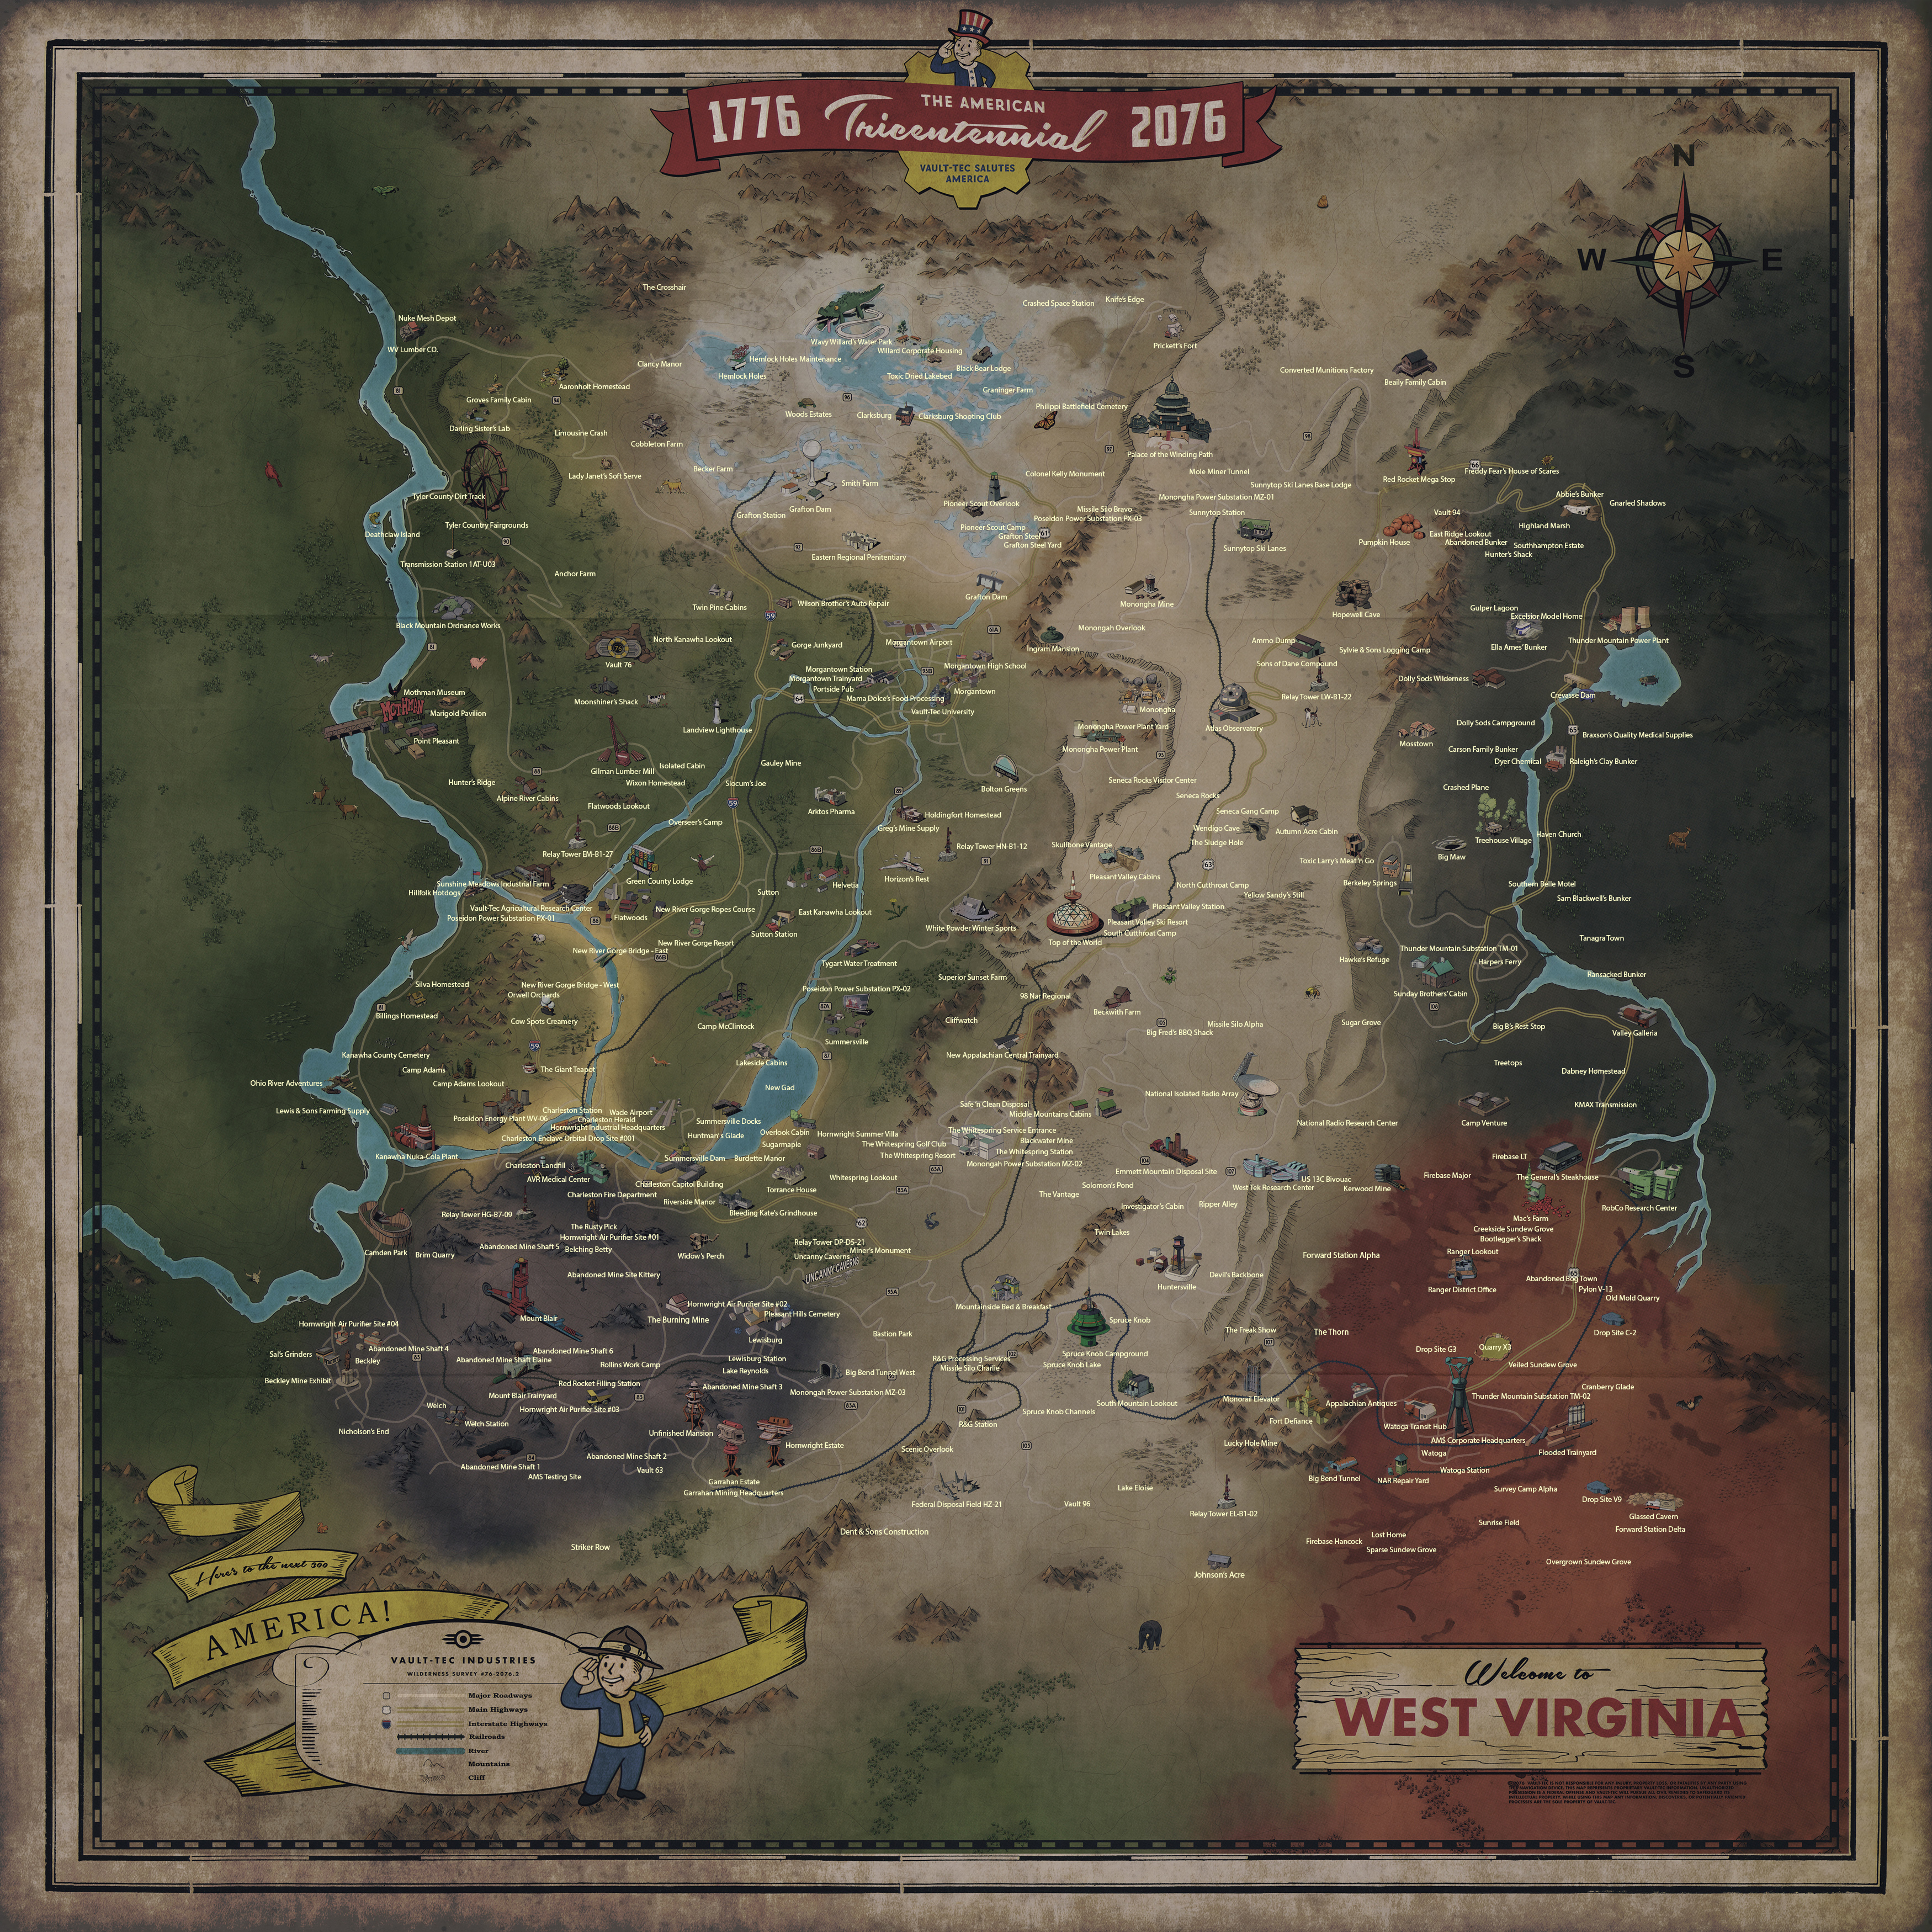 Fallout 2 World Map in the Style of the Fallout: New Vegas World Map : r/fnv